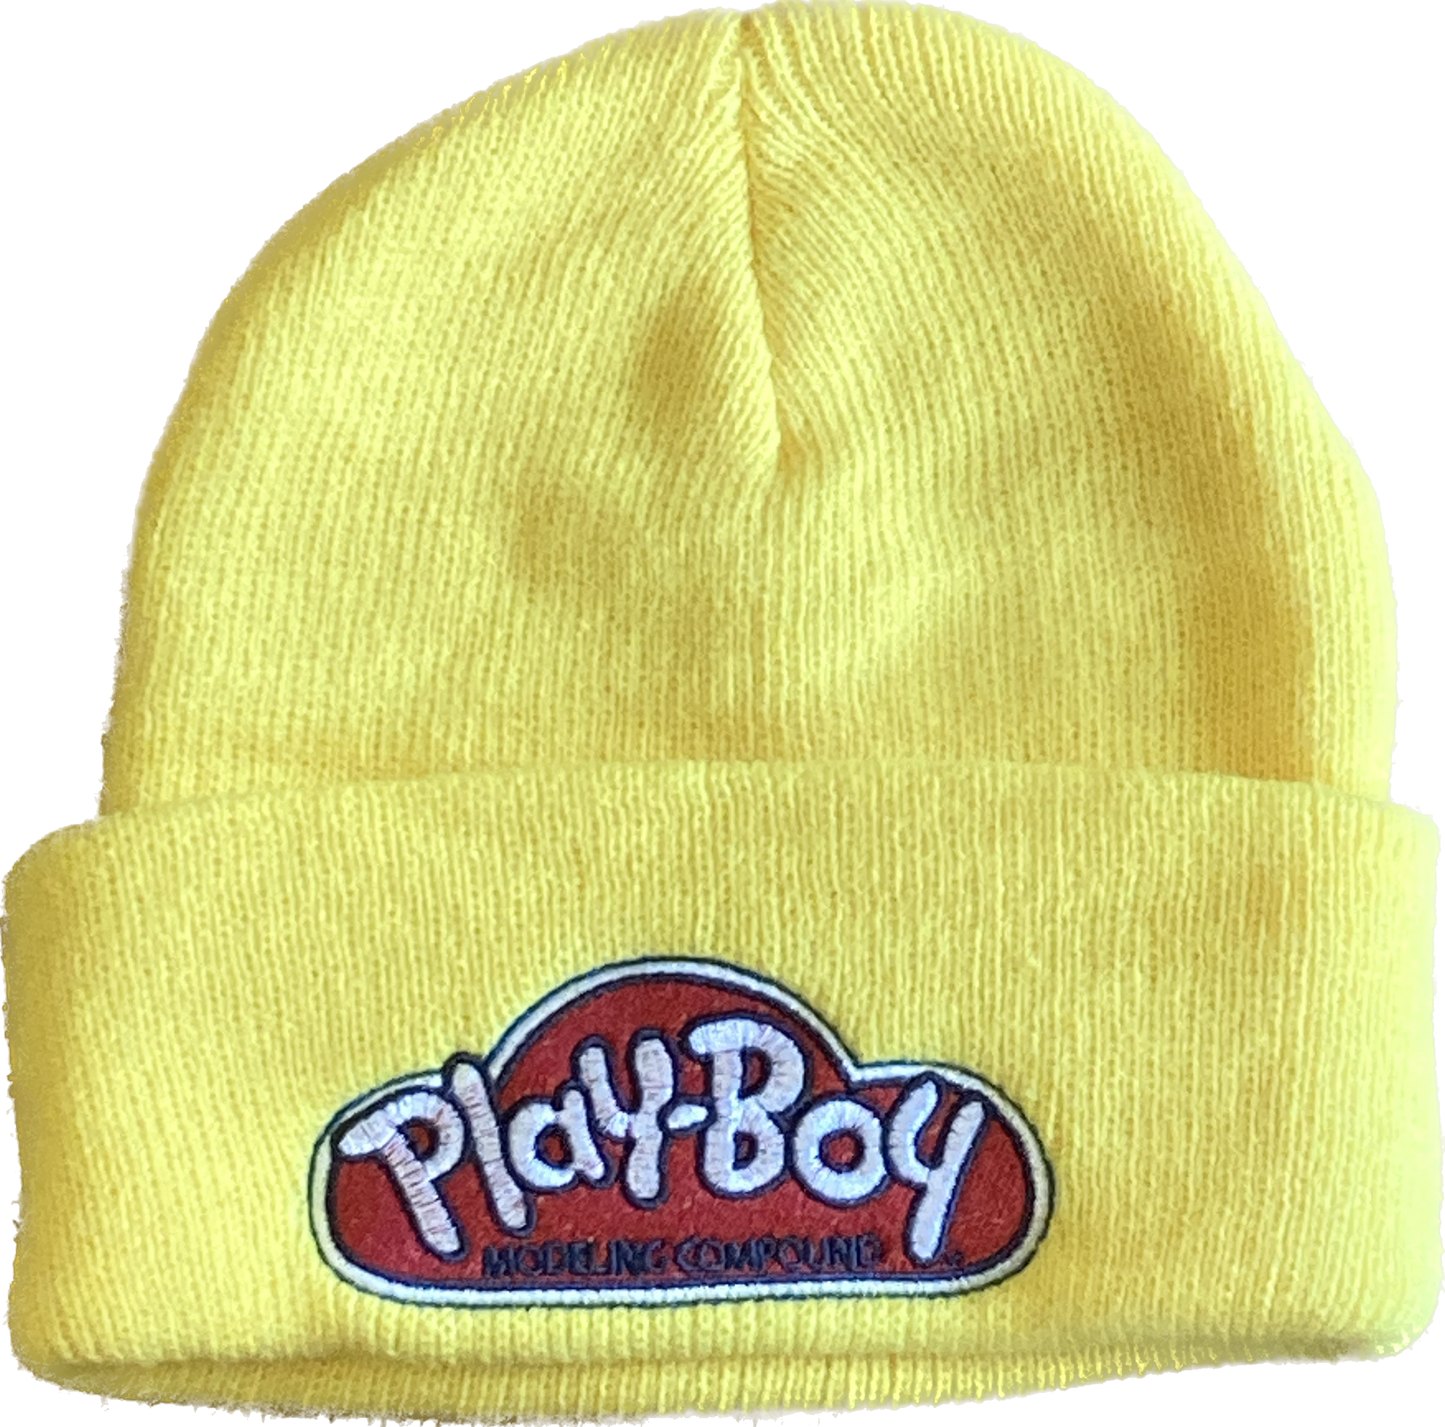 PlayBoy Play-Doh Crossover Beanie